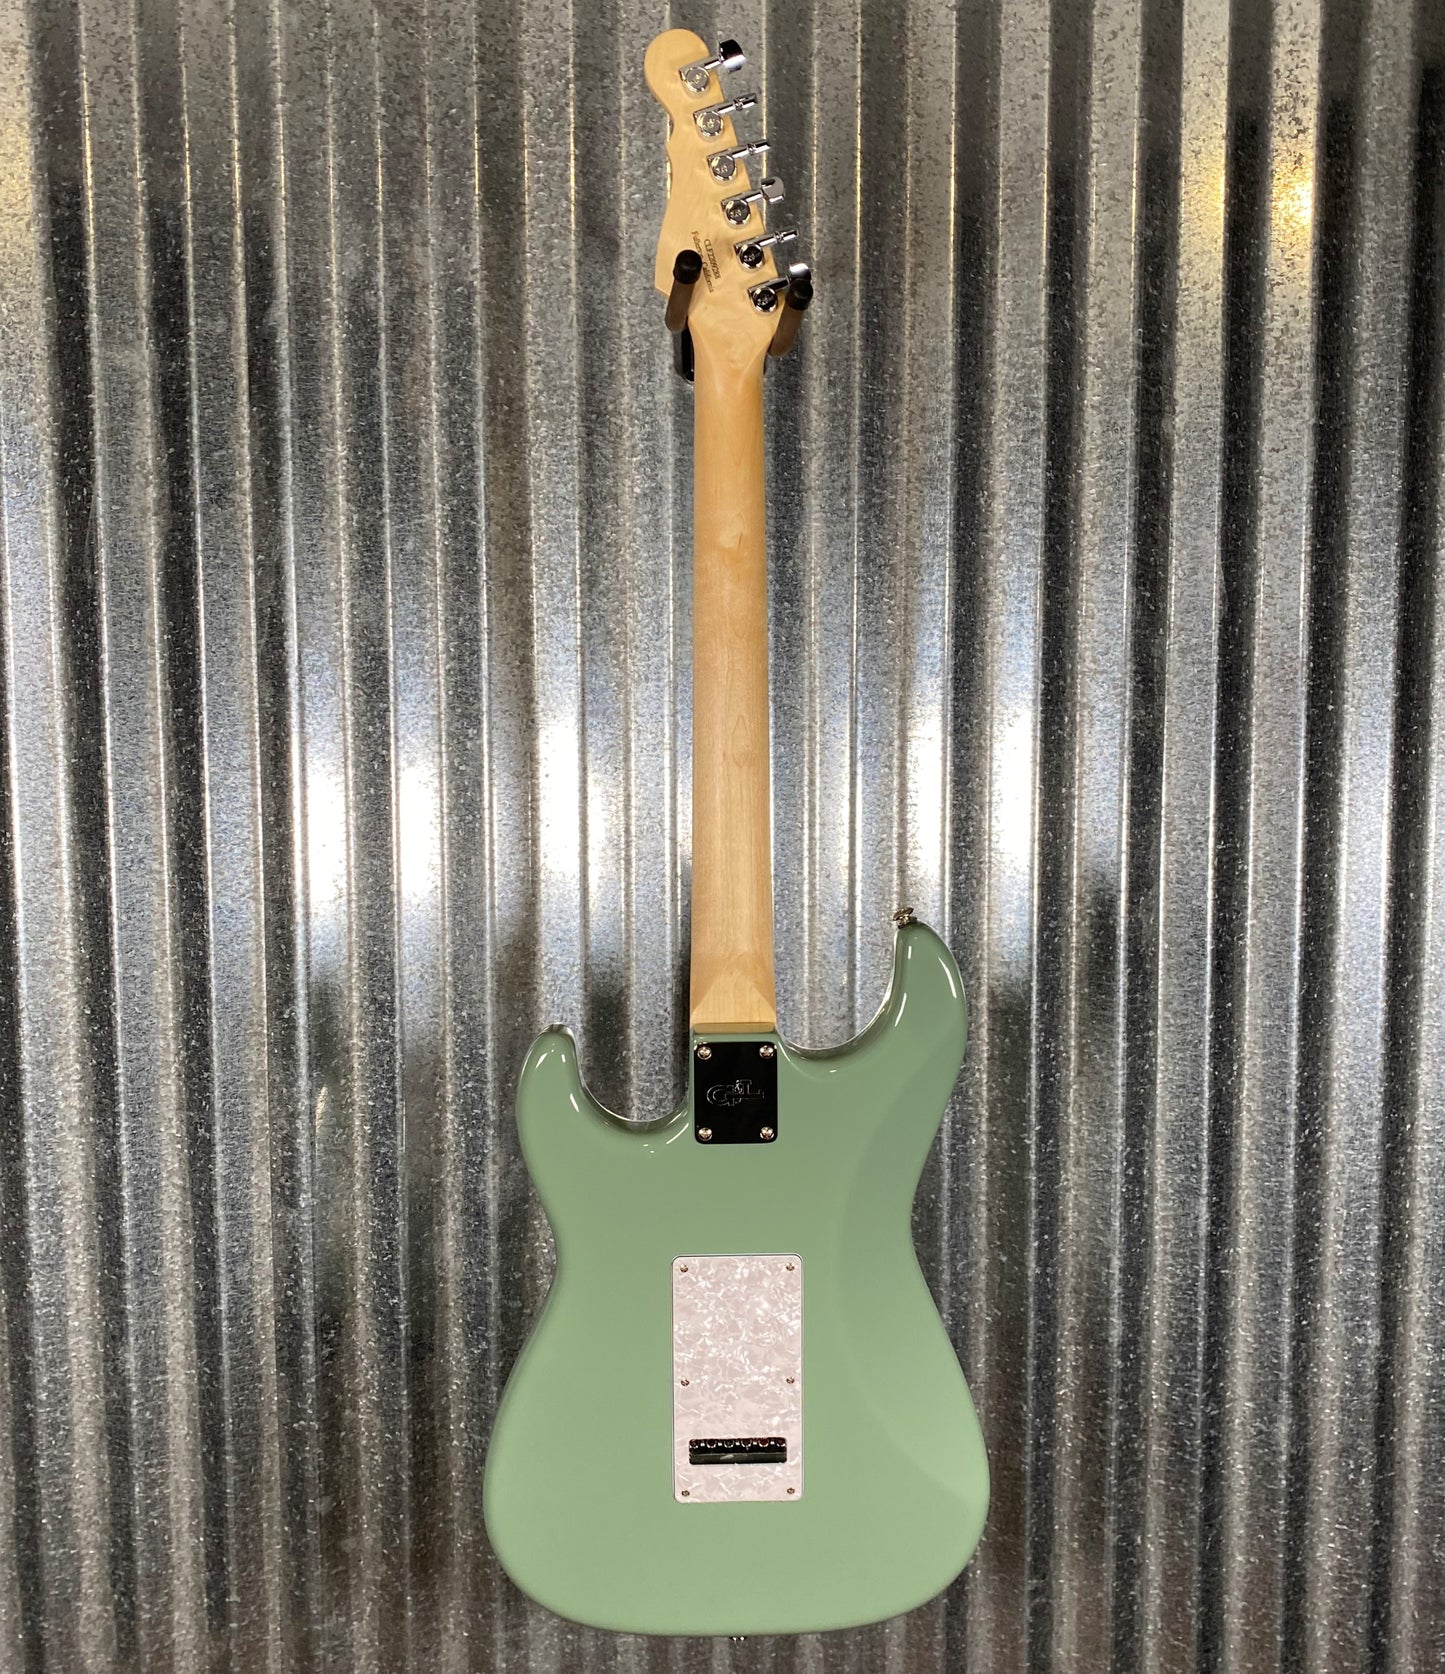 G&L USA 2022 Fullerton Deluxe Legacy HB Matcha Green Guitar & Bag #9288 Used